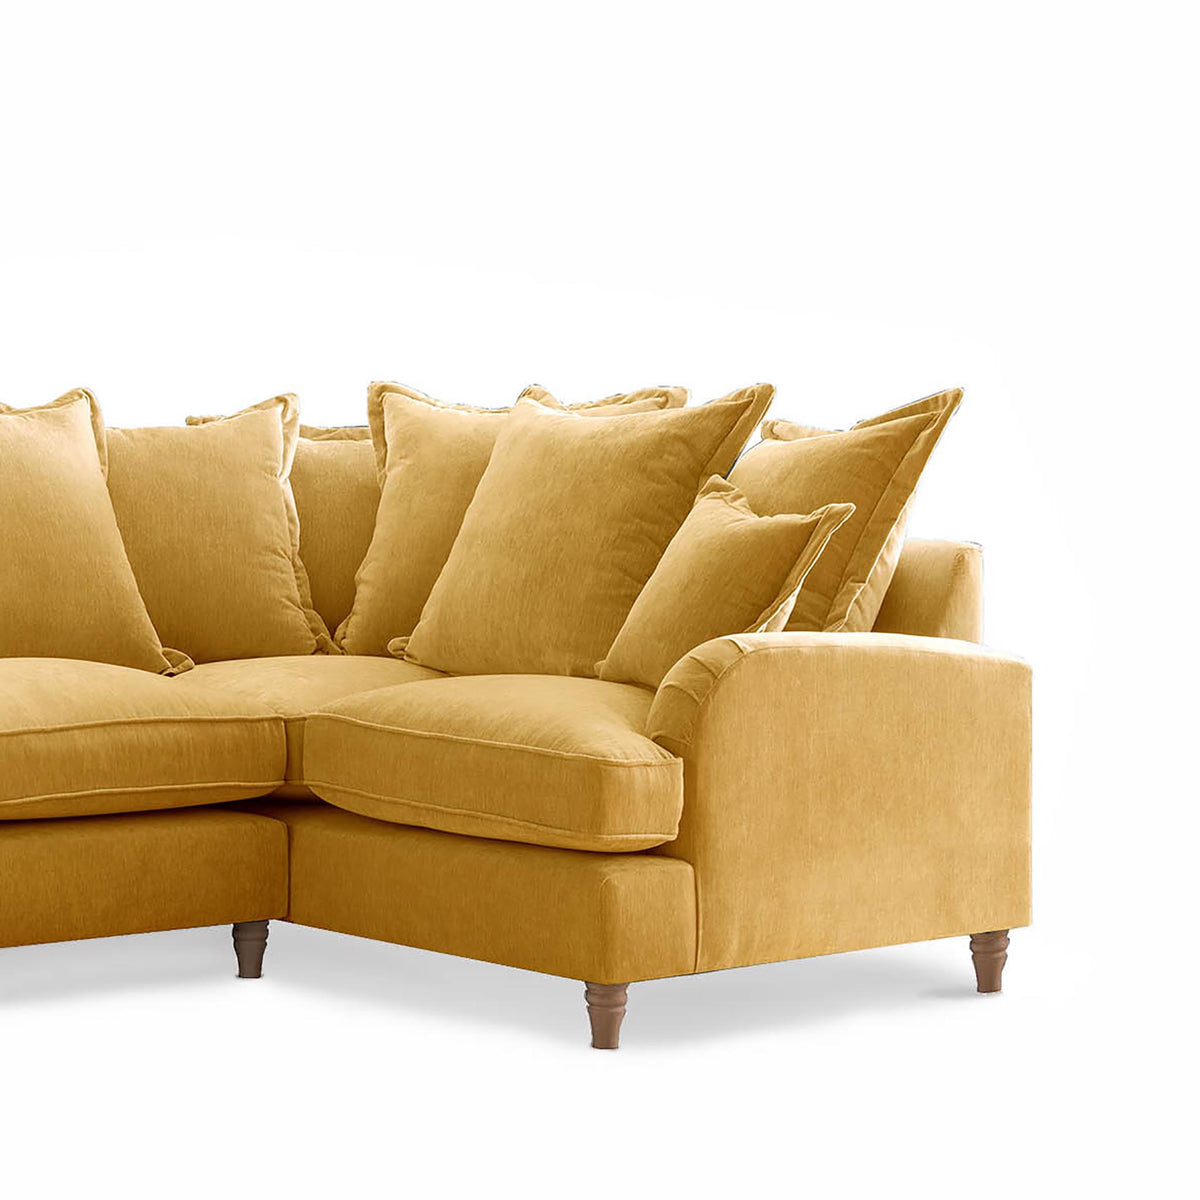 Rupert Gold 2 Corner 1 Right Hand Sofa Couch